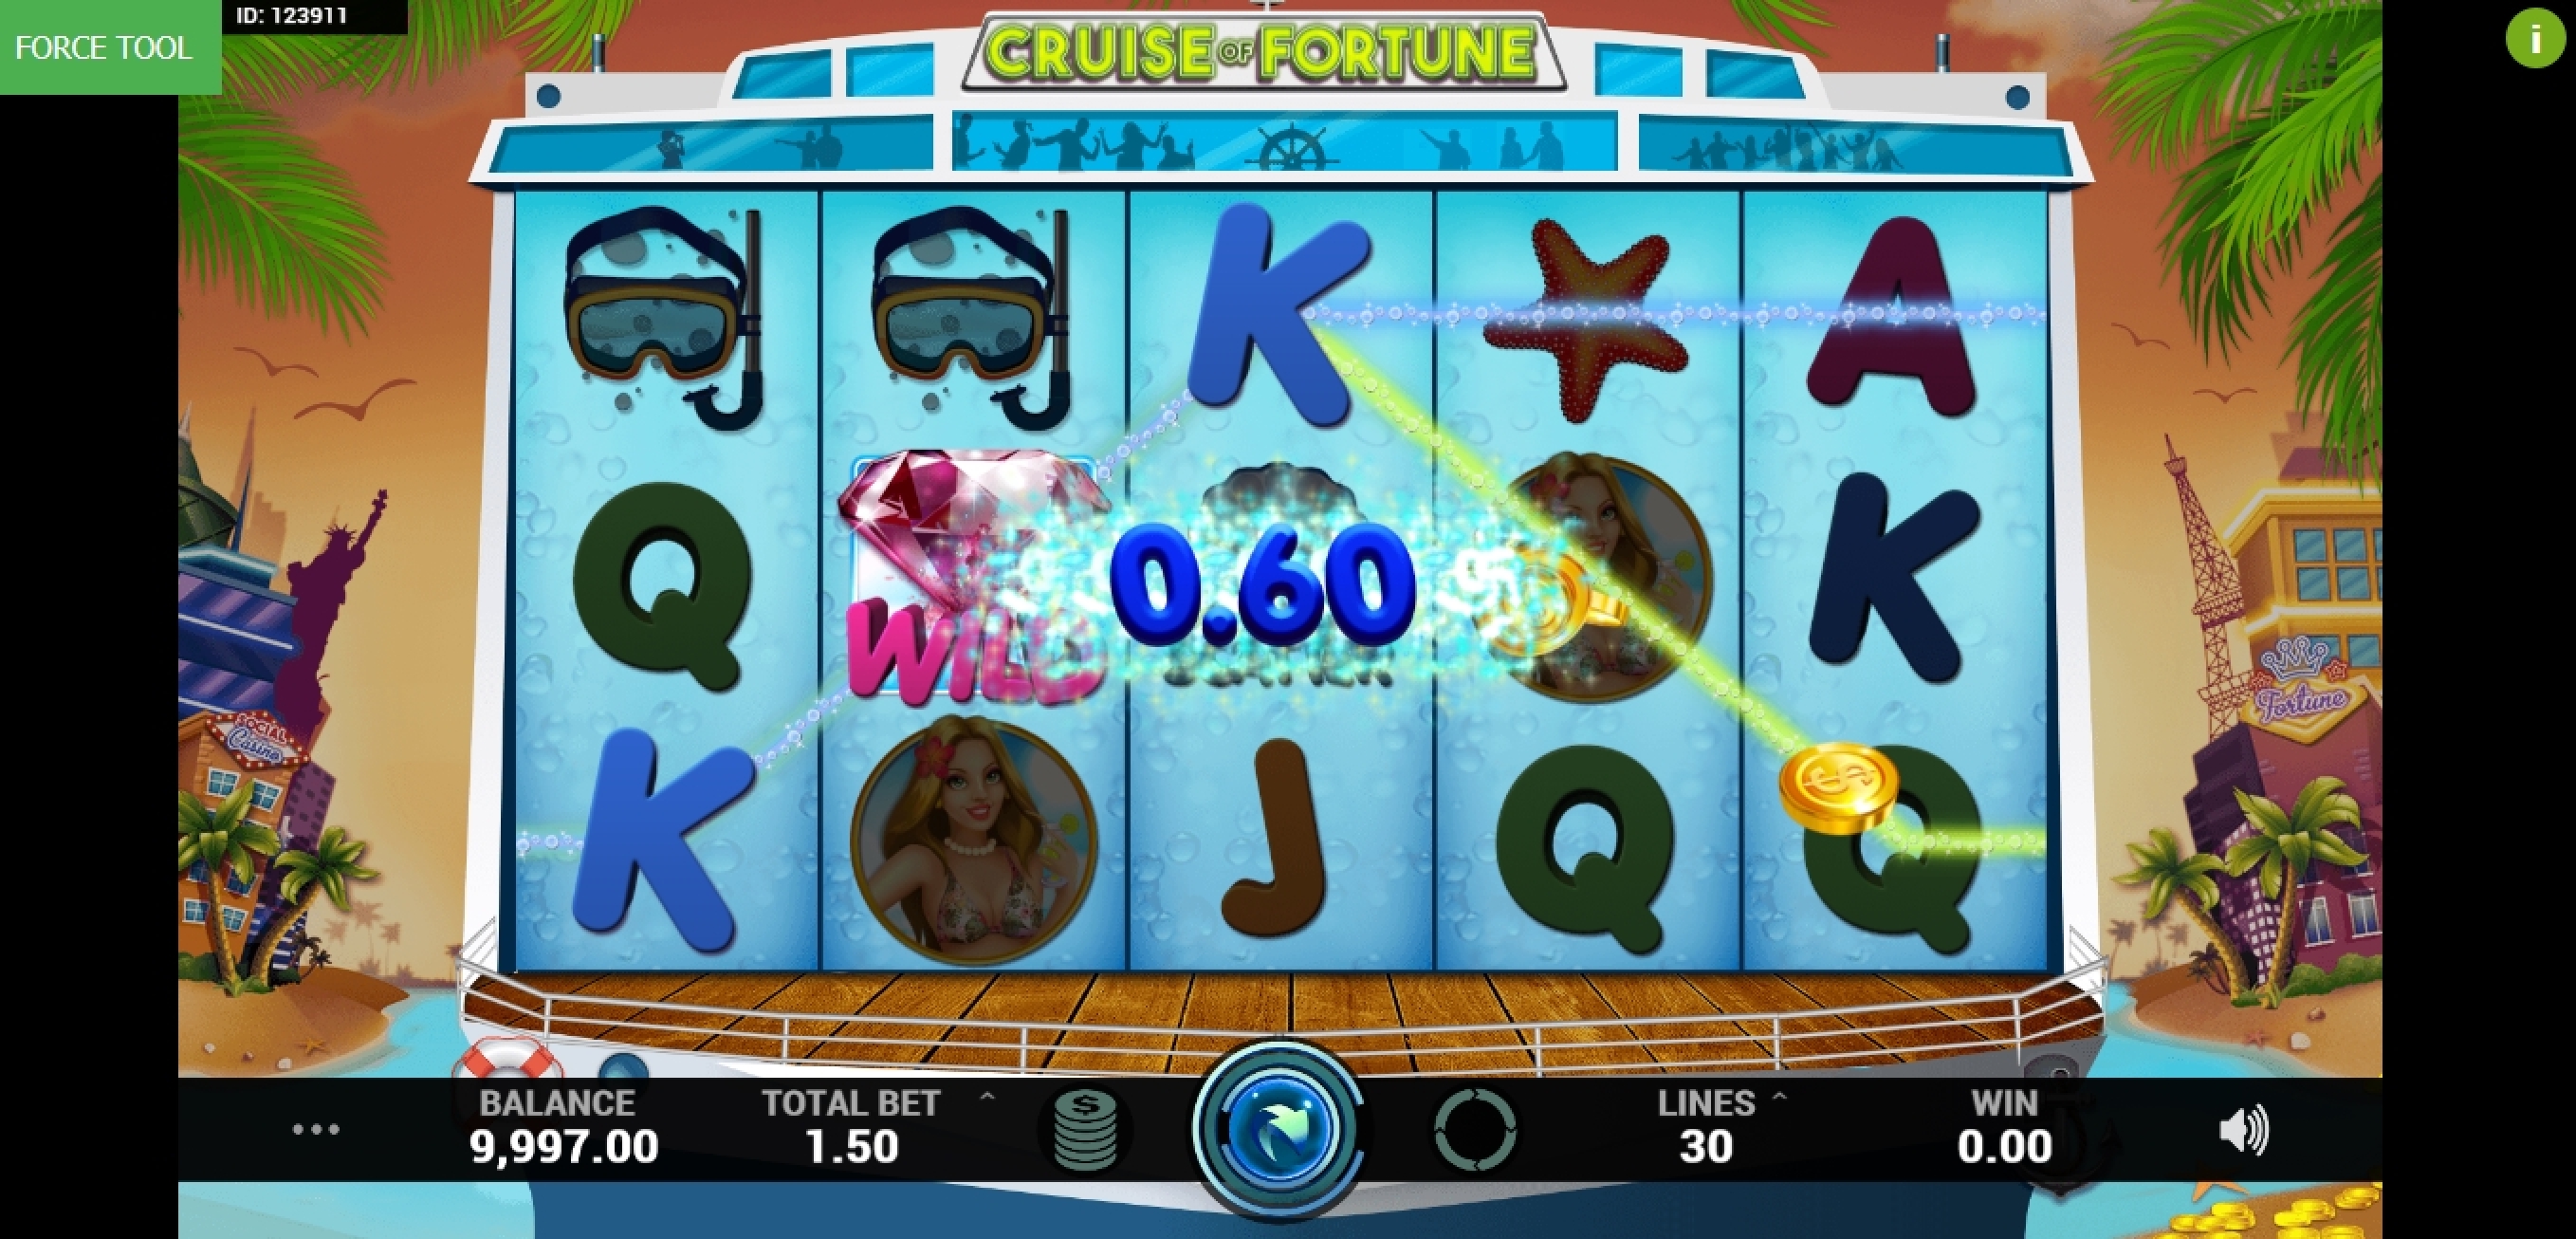 Win Money in Cruise of Fortune Free Slot Game by Caleta Gaming